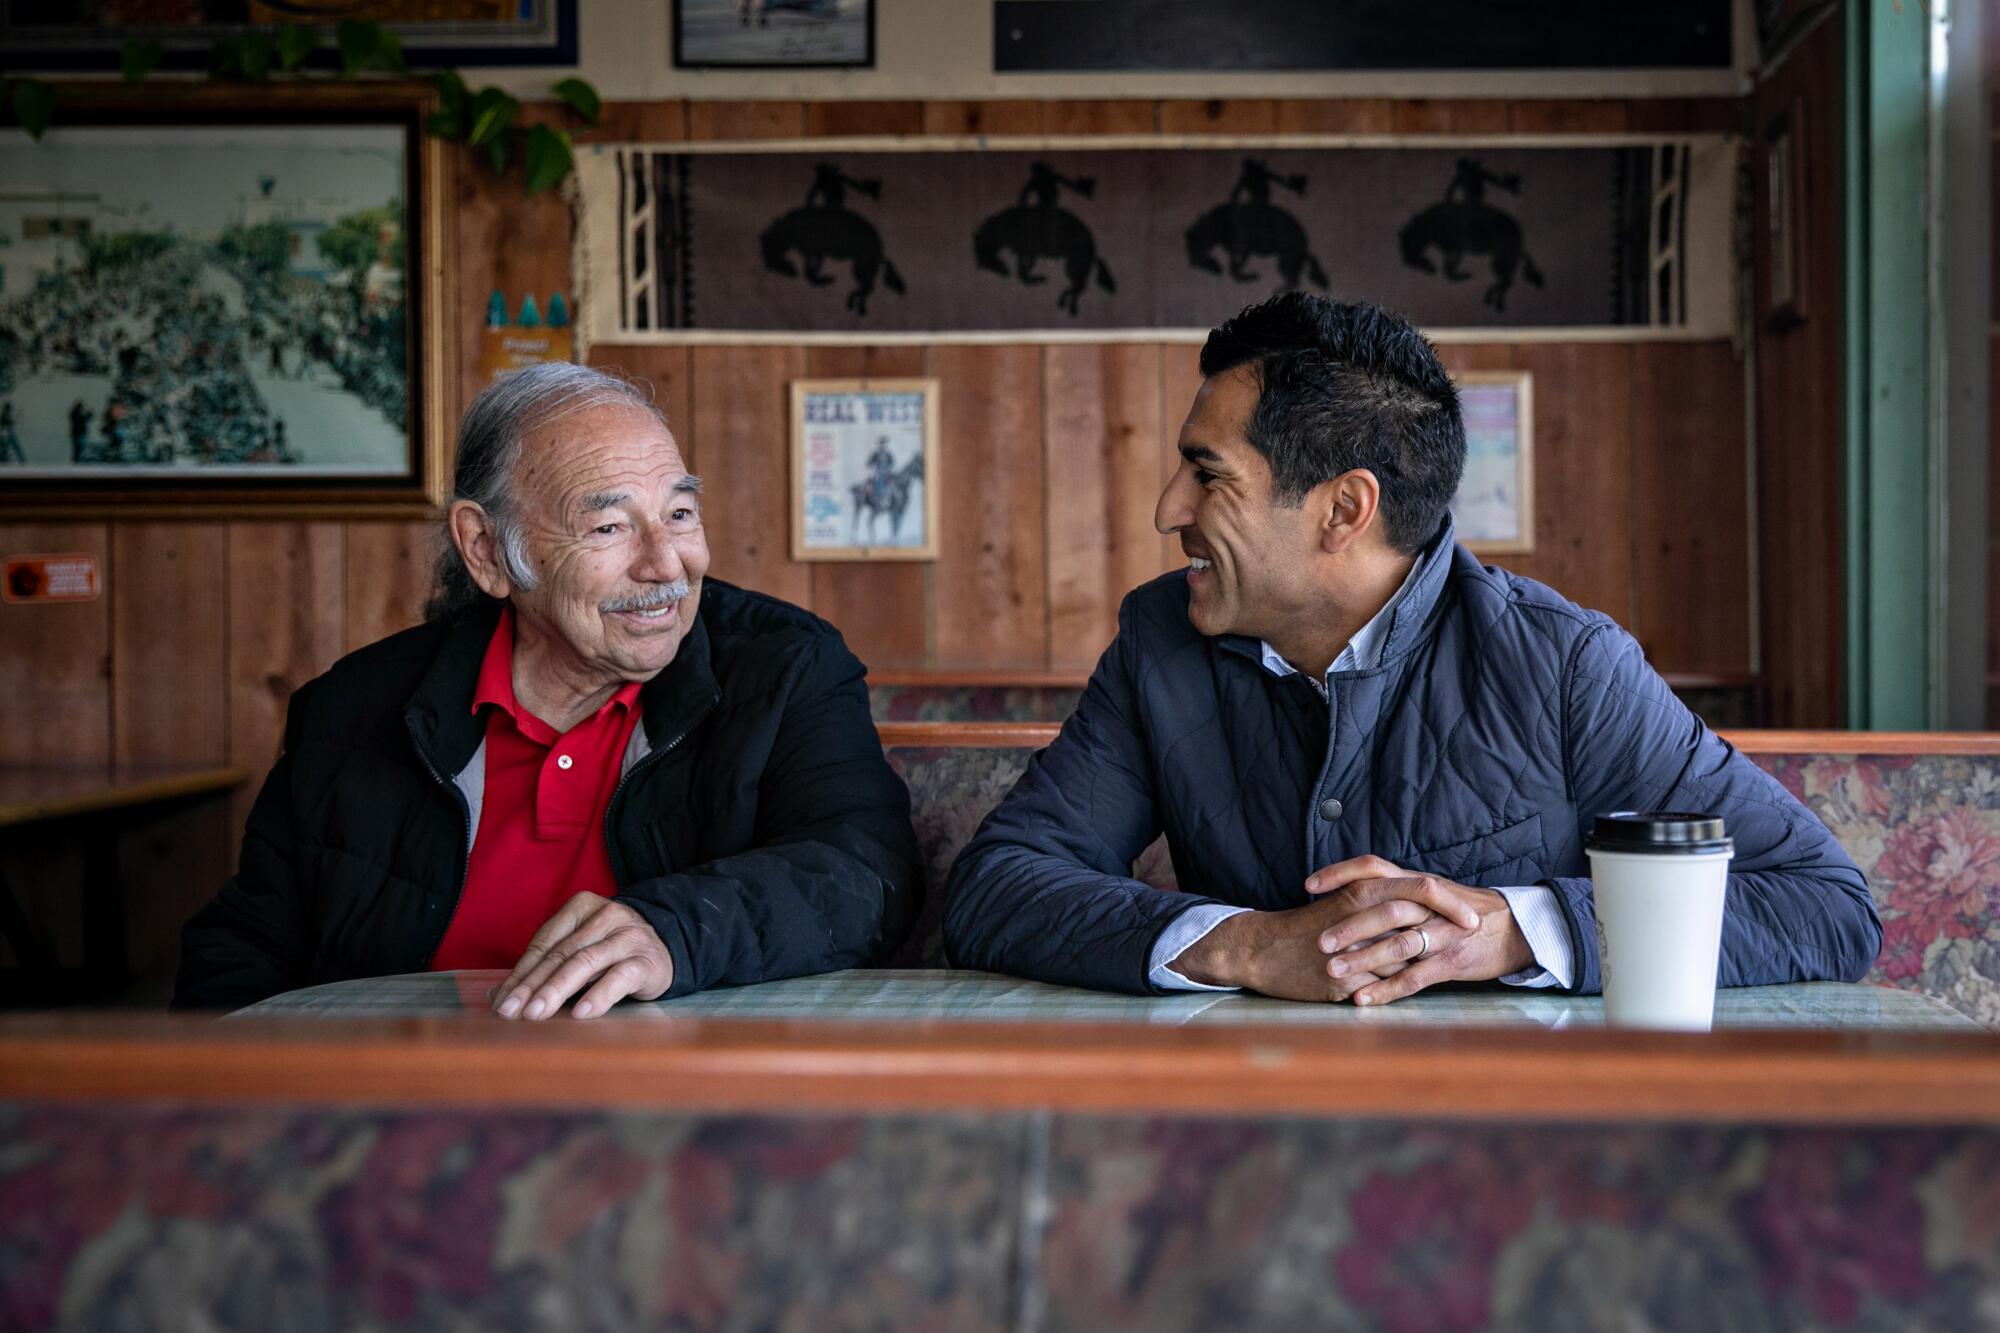 California Assembly Speaker Robert Rivas has a cup of coffee with Samuel Ramos.